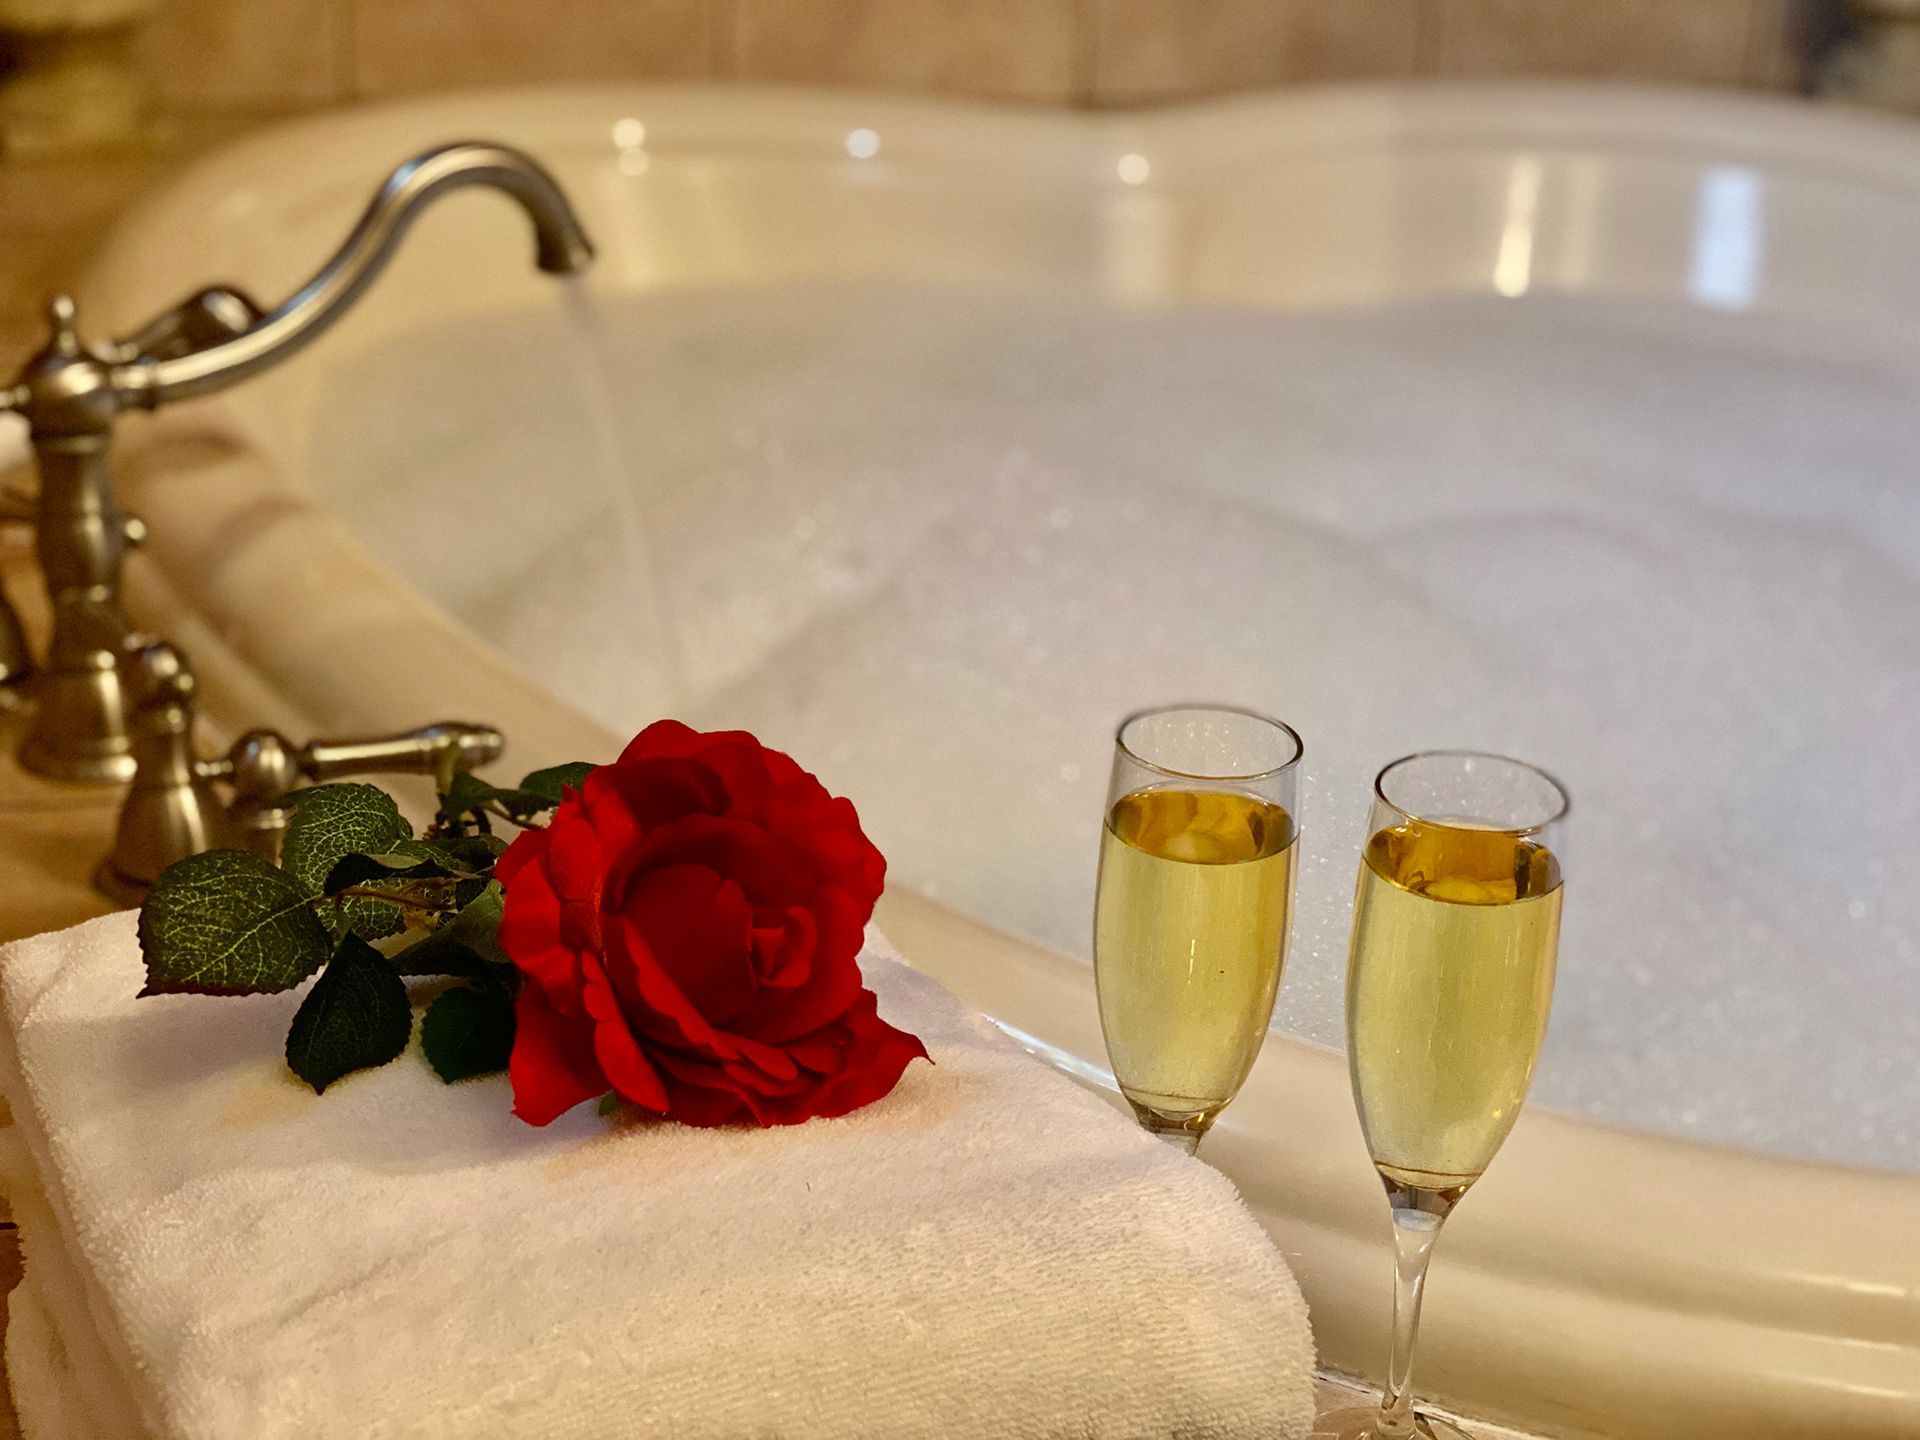 heart shaped bathtub with a rose and champagne